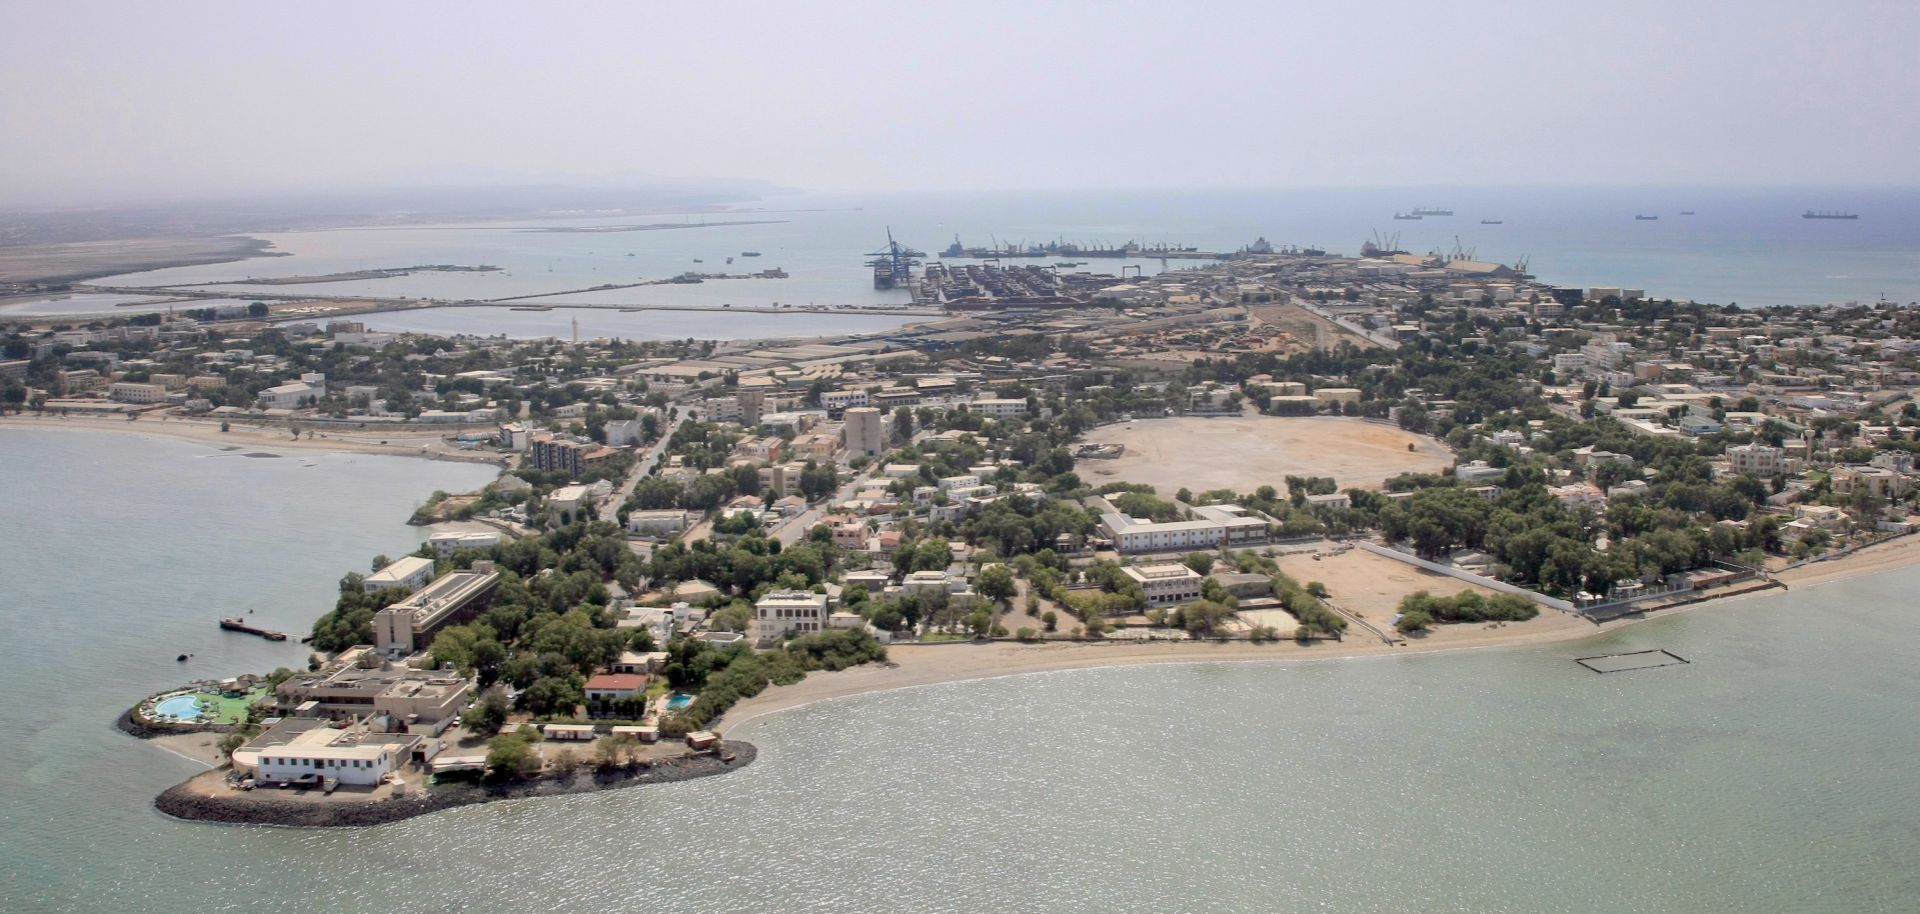 For Djibouti, It's All About Location